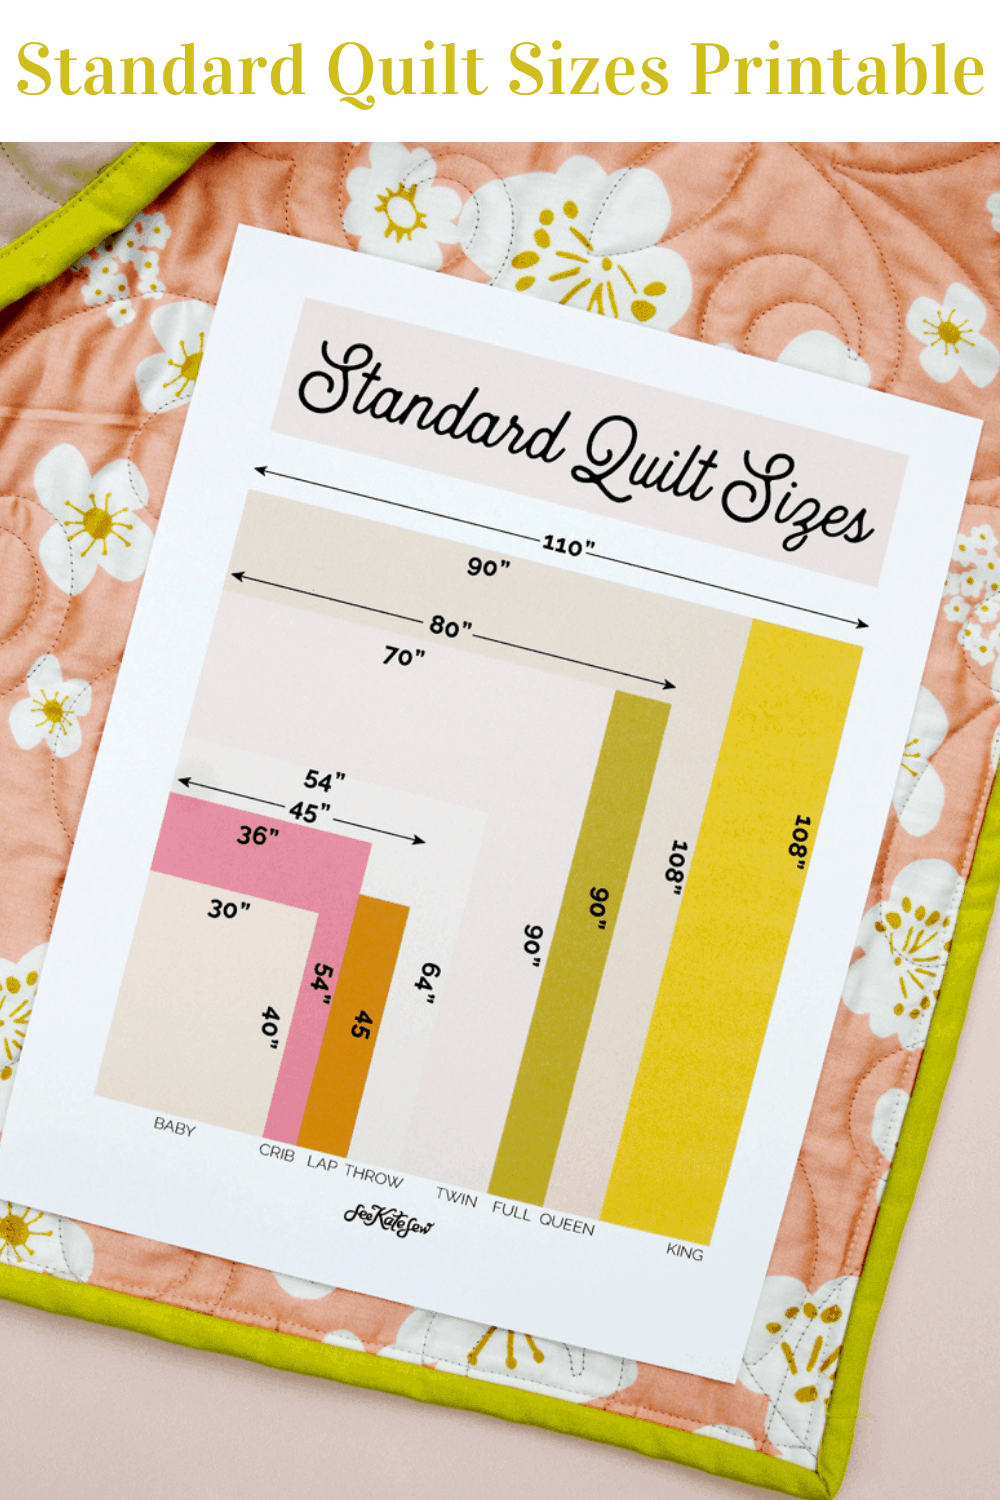 Quilt Sizes Measurements in inches